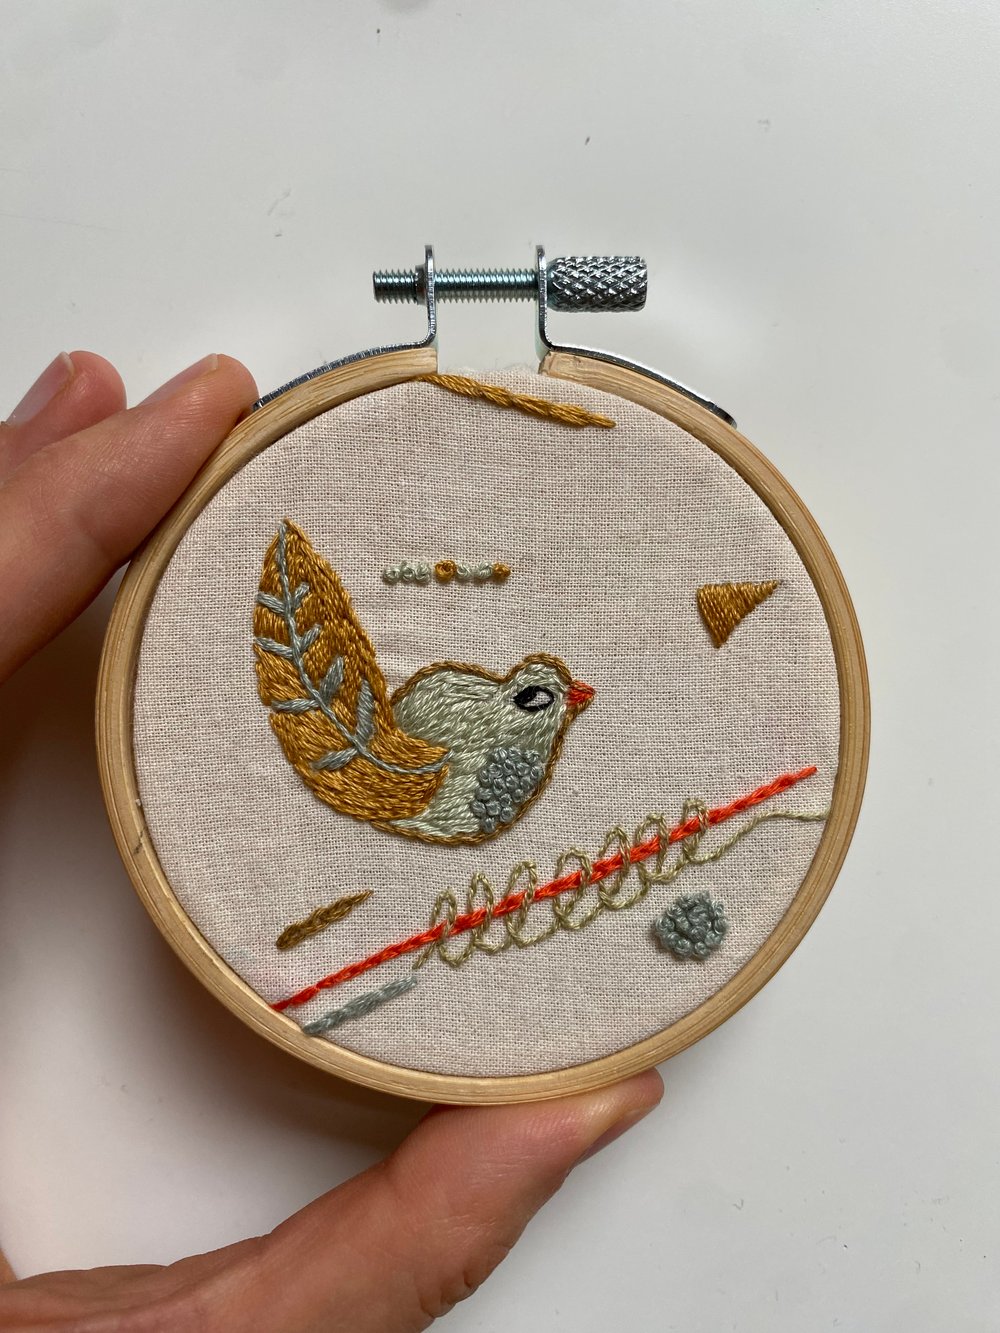 Image of Birdie - hand embroidered art on a tiny hoop 8.5cm (3.5")